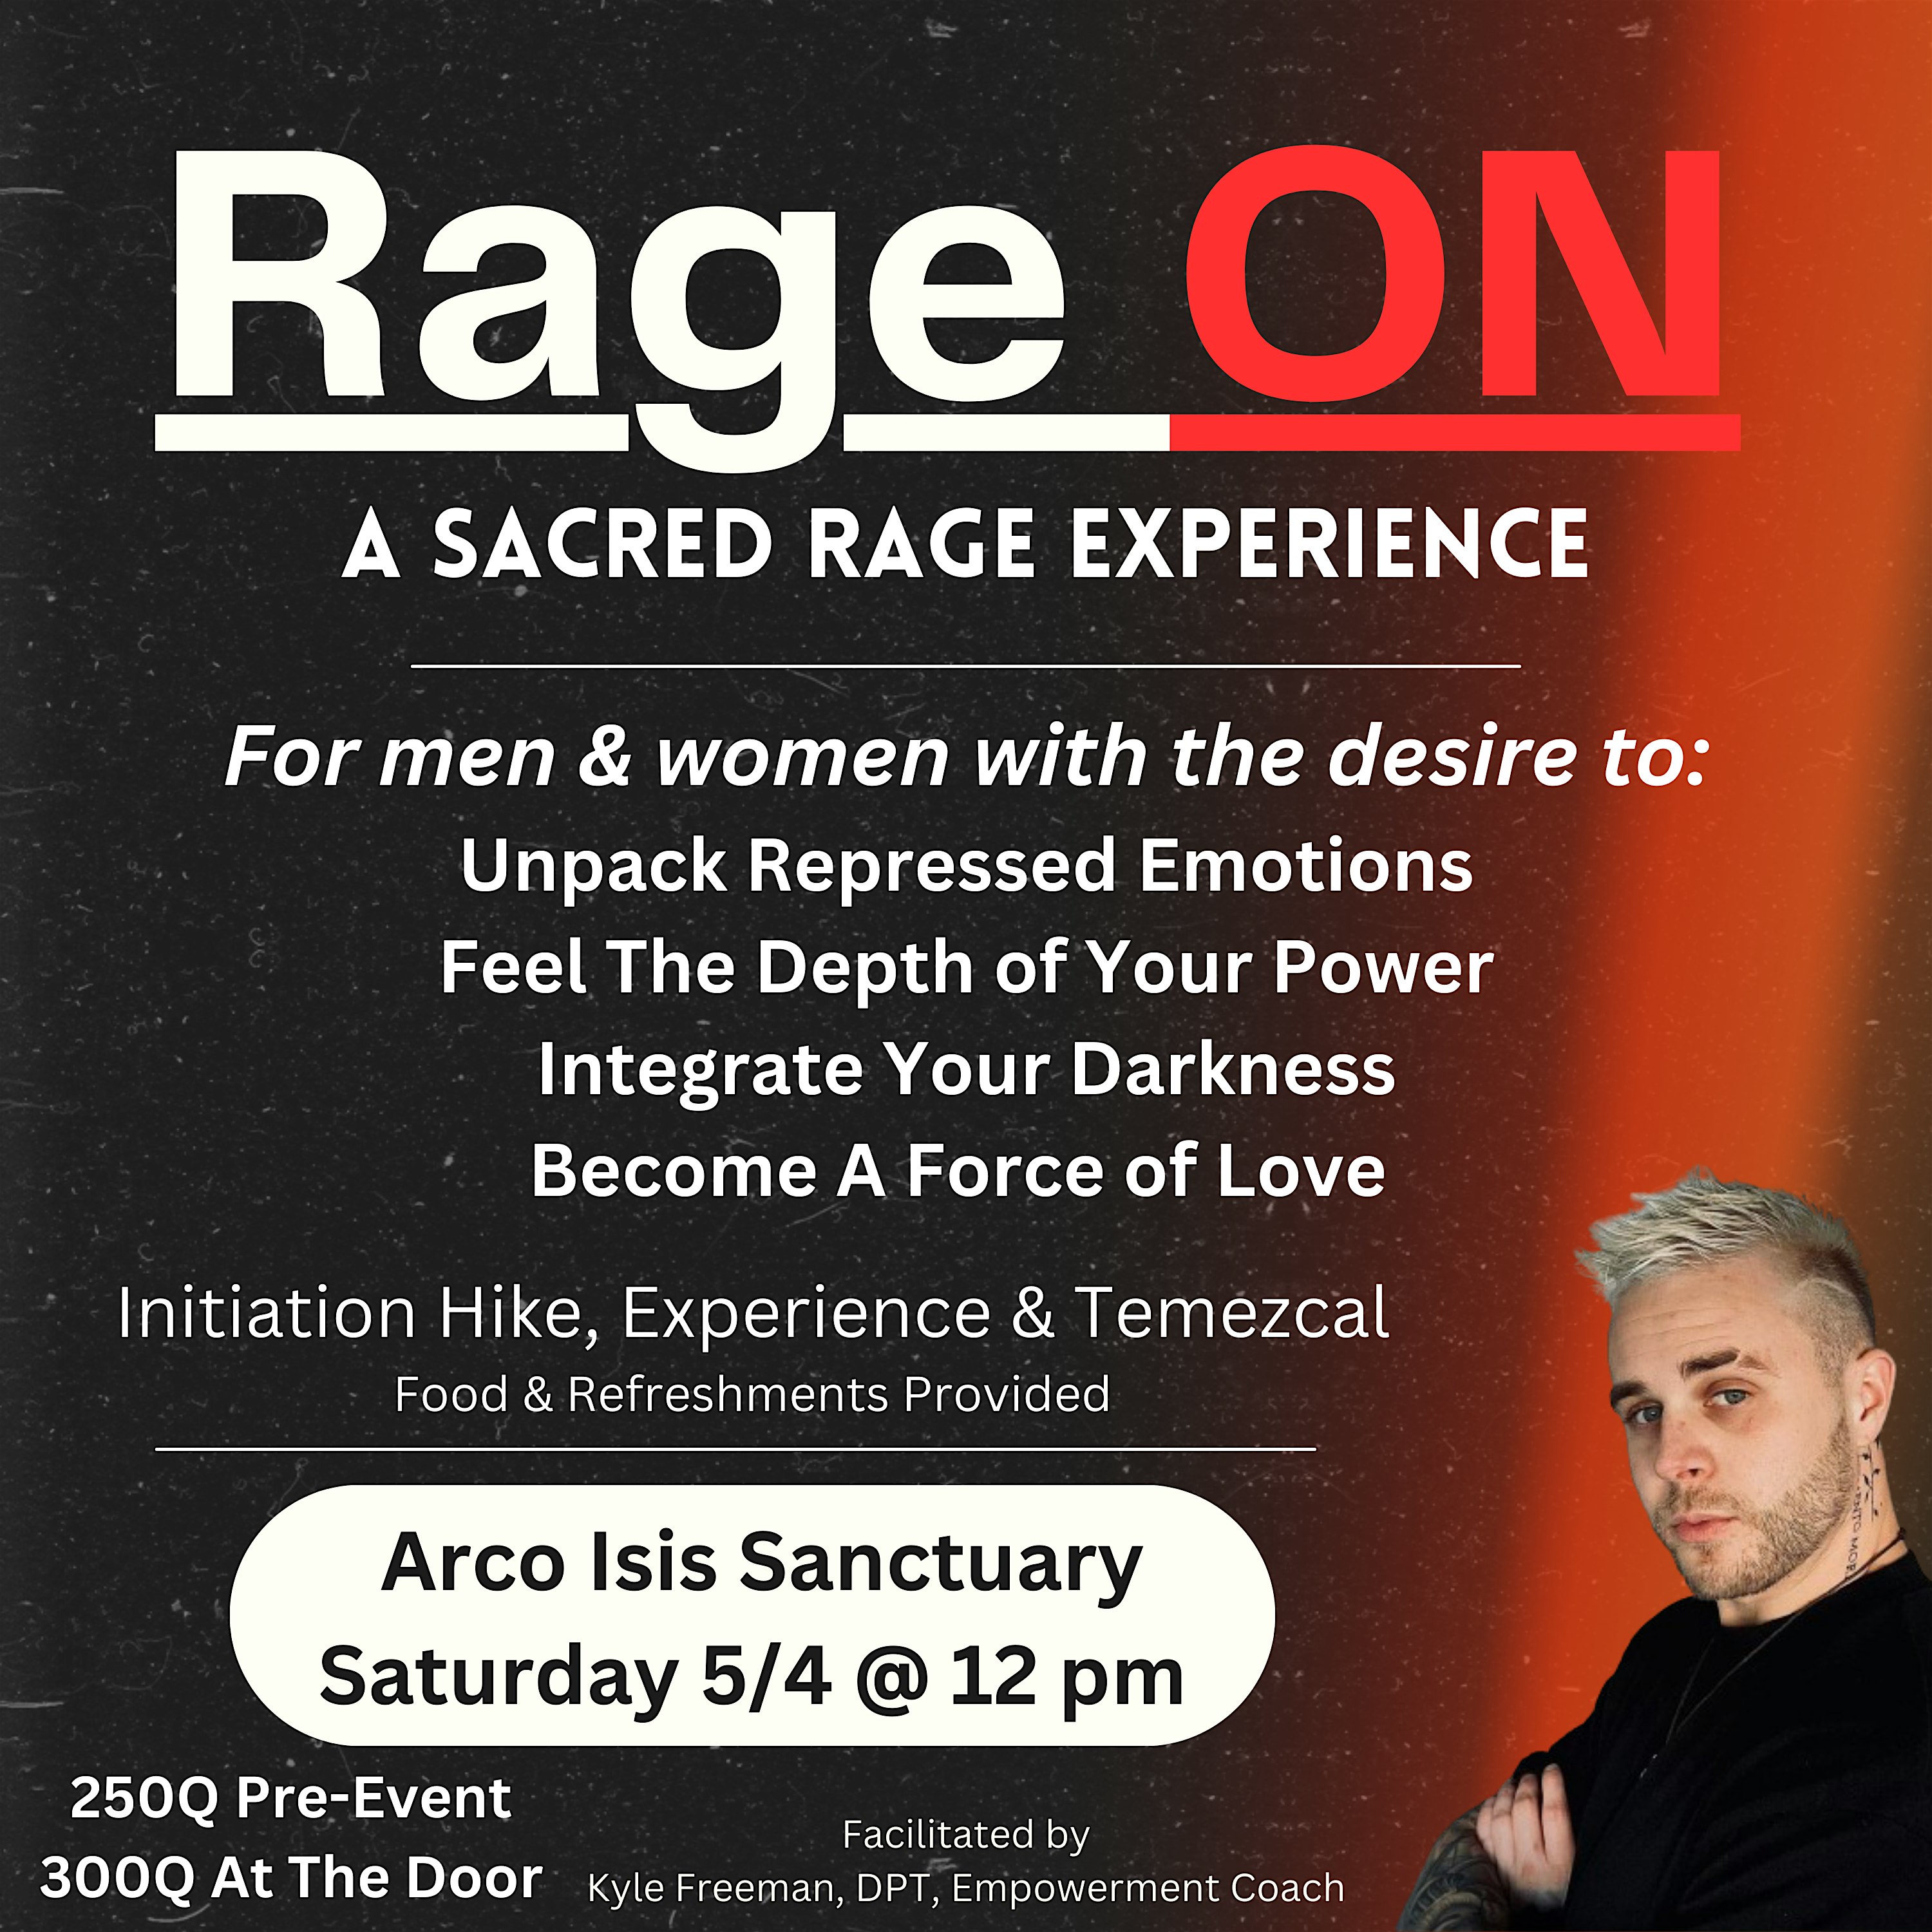 Rage ON - A Sacred Rage Experience